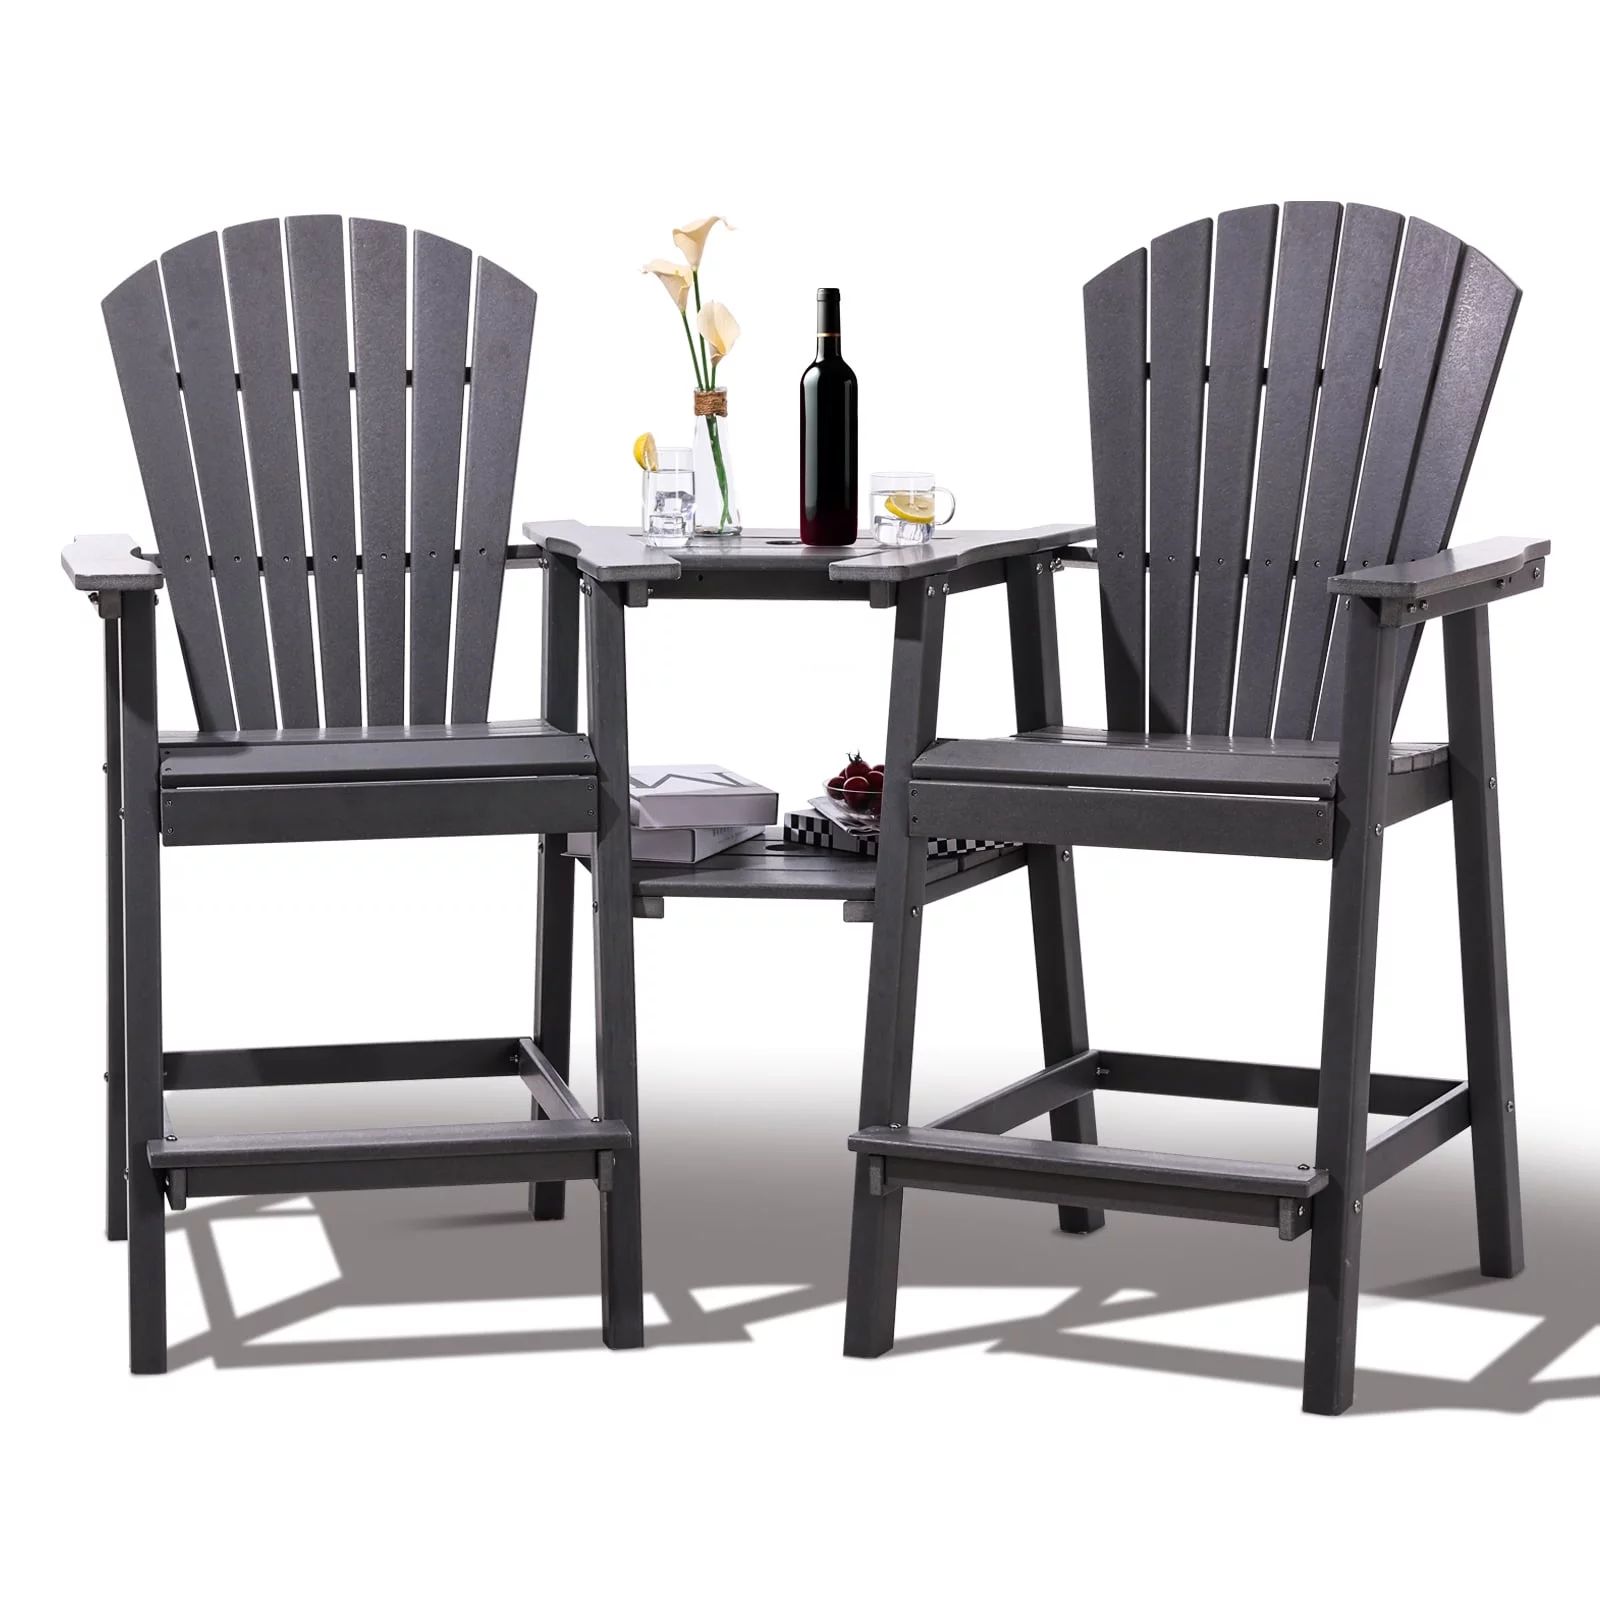 Tall Adirondack Chairs Set of 2，Outdoor Adirondack Barstools with Double Connecting Tray Patio ... | Walmart (US)